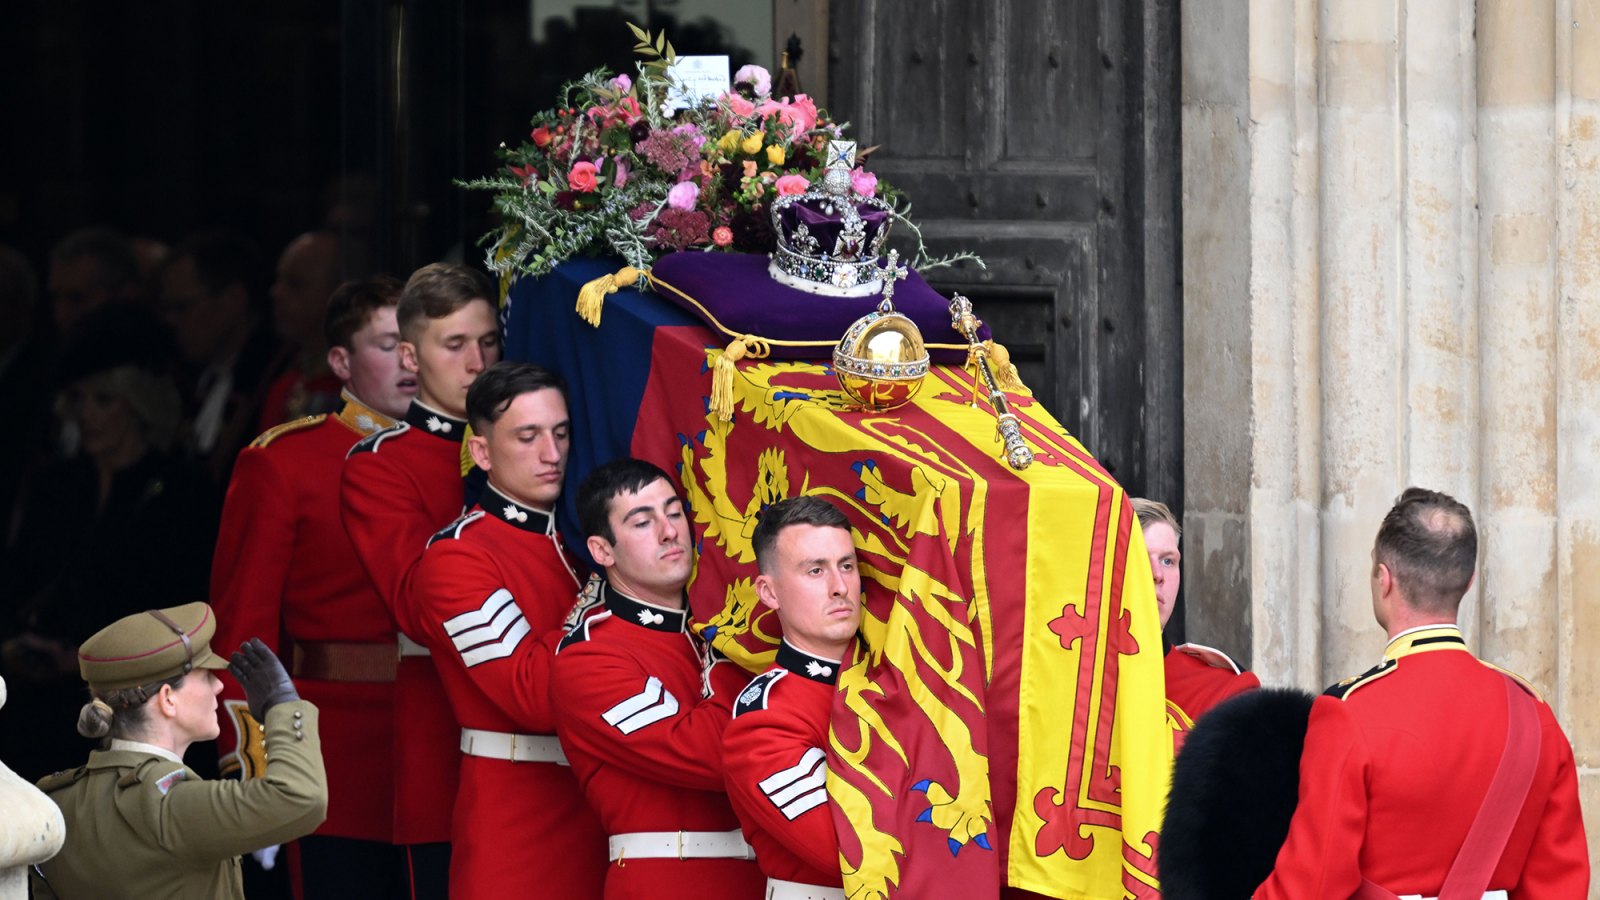 Queen Elizabeth II’s State Funeral Cost More Than $200 Million, UK Government Reveals